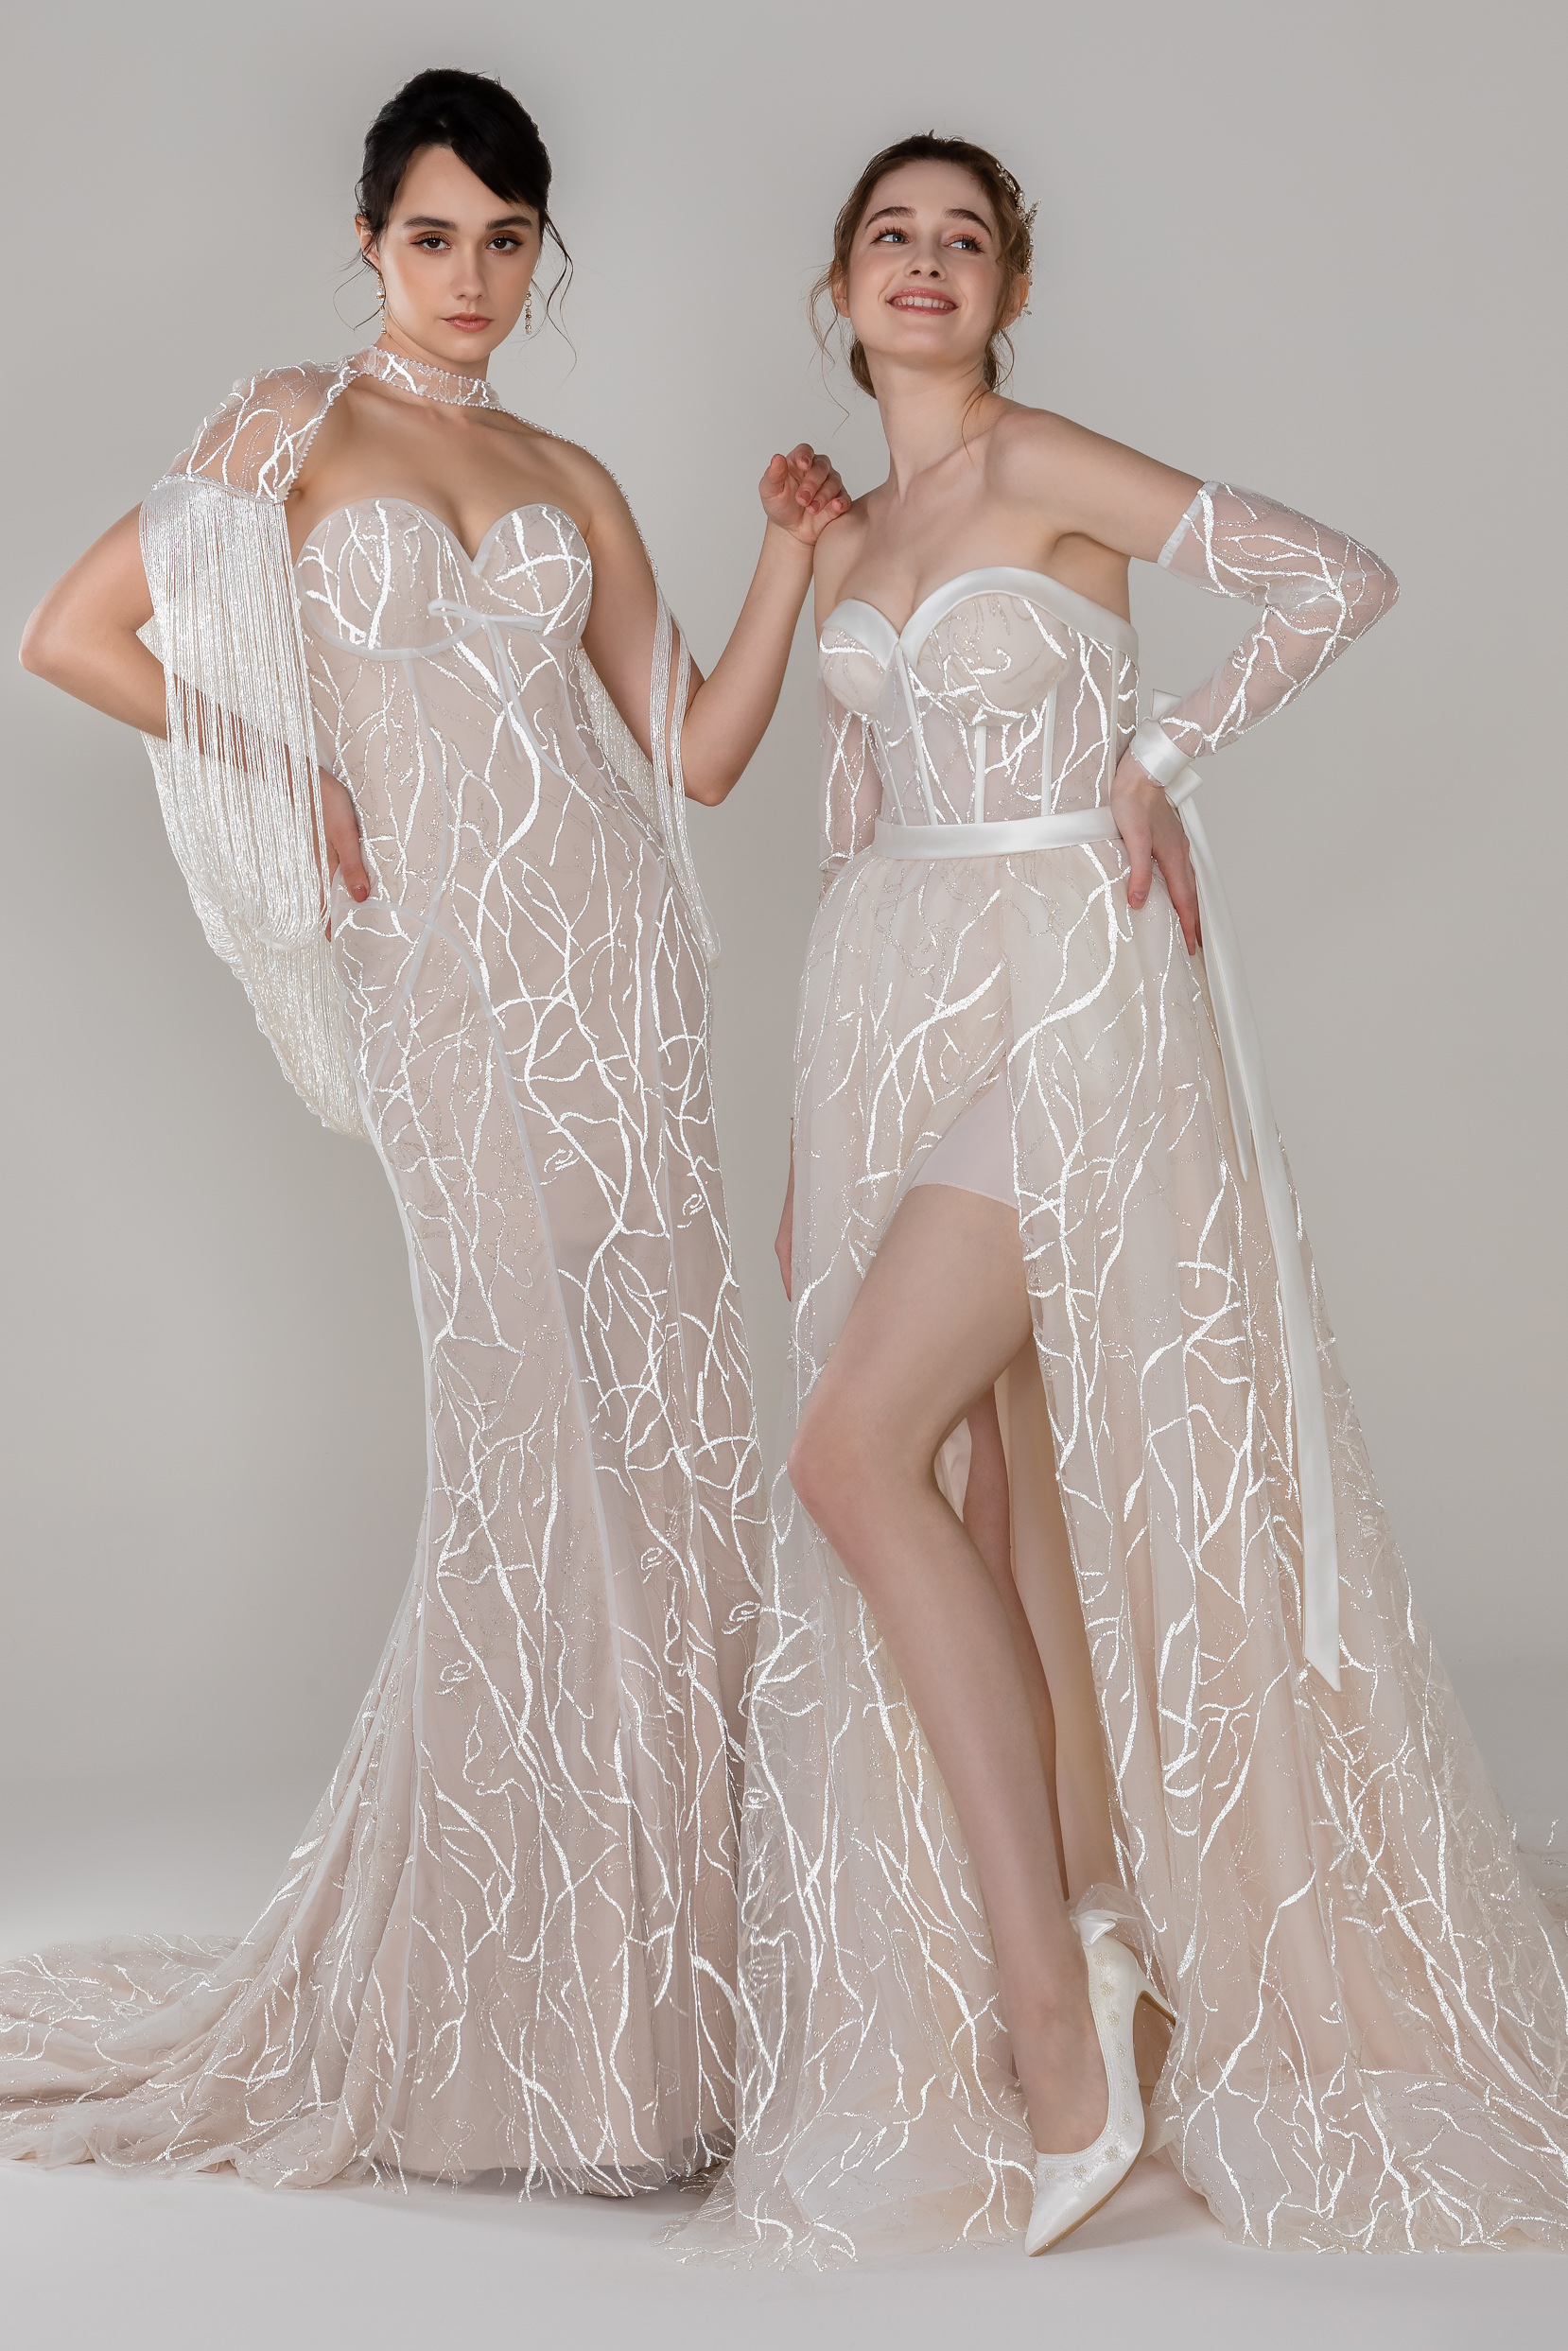 Sparkly Wedding Dresses by Cocomelody 2022 - CW2495 | ARIELLA and CW2494 | AILEEN